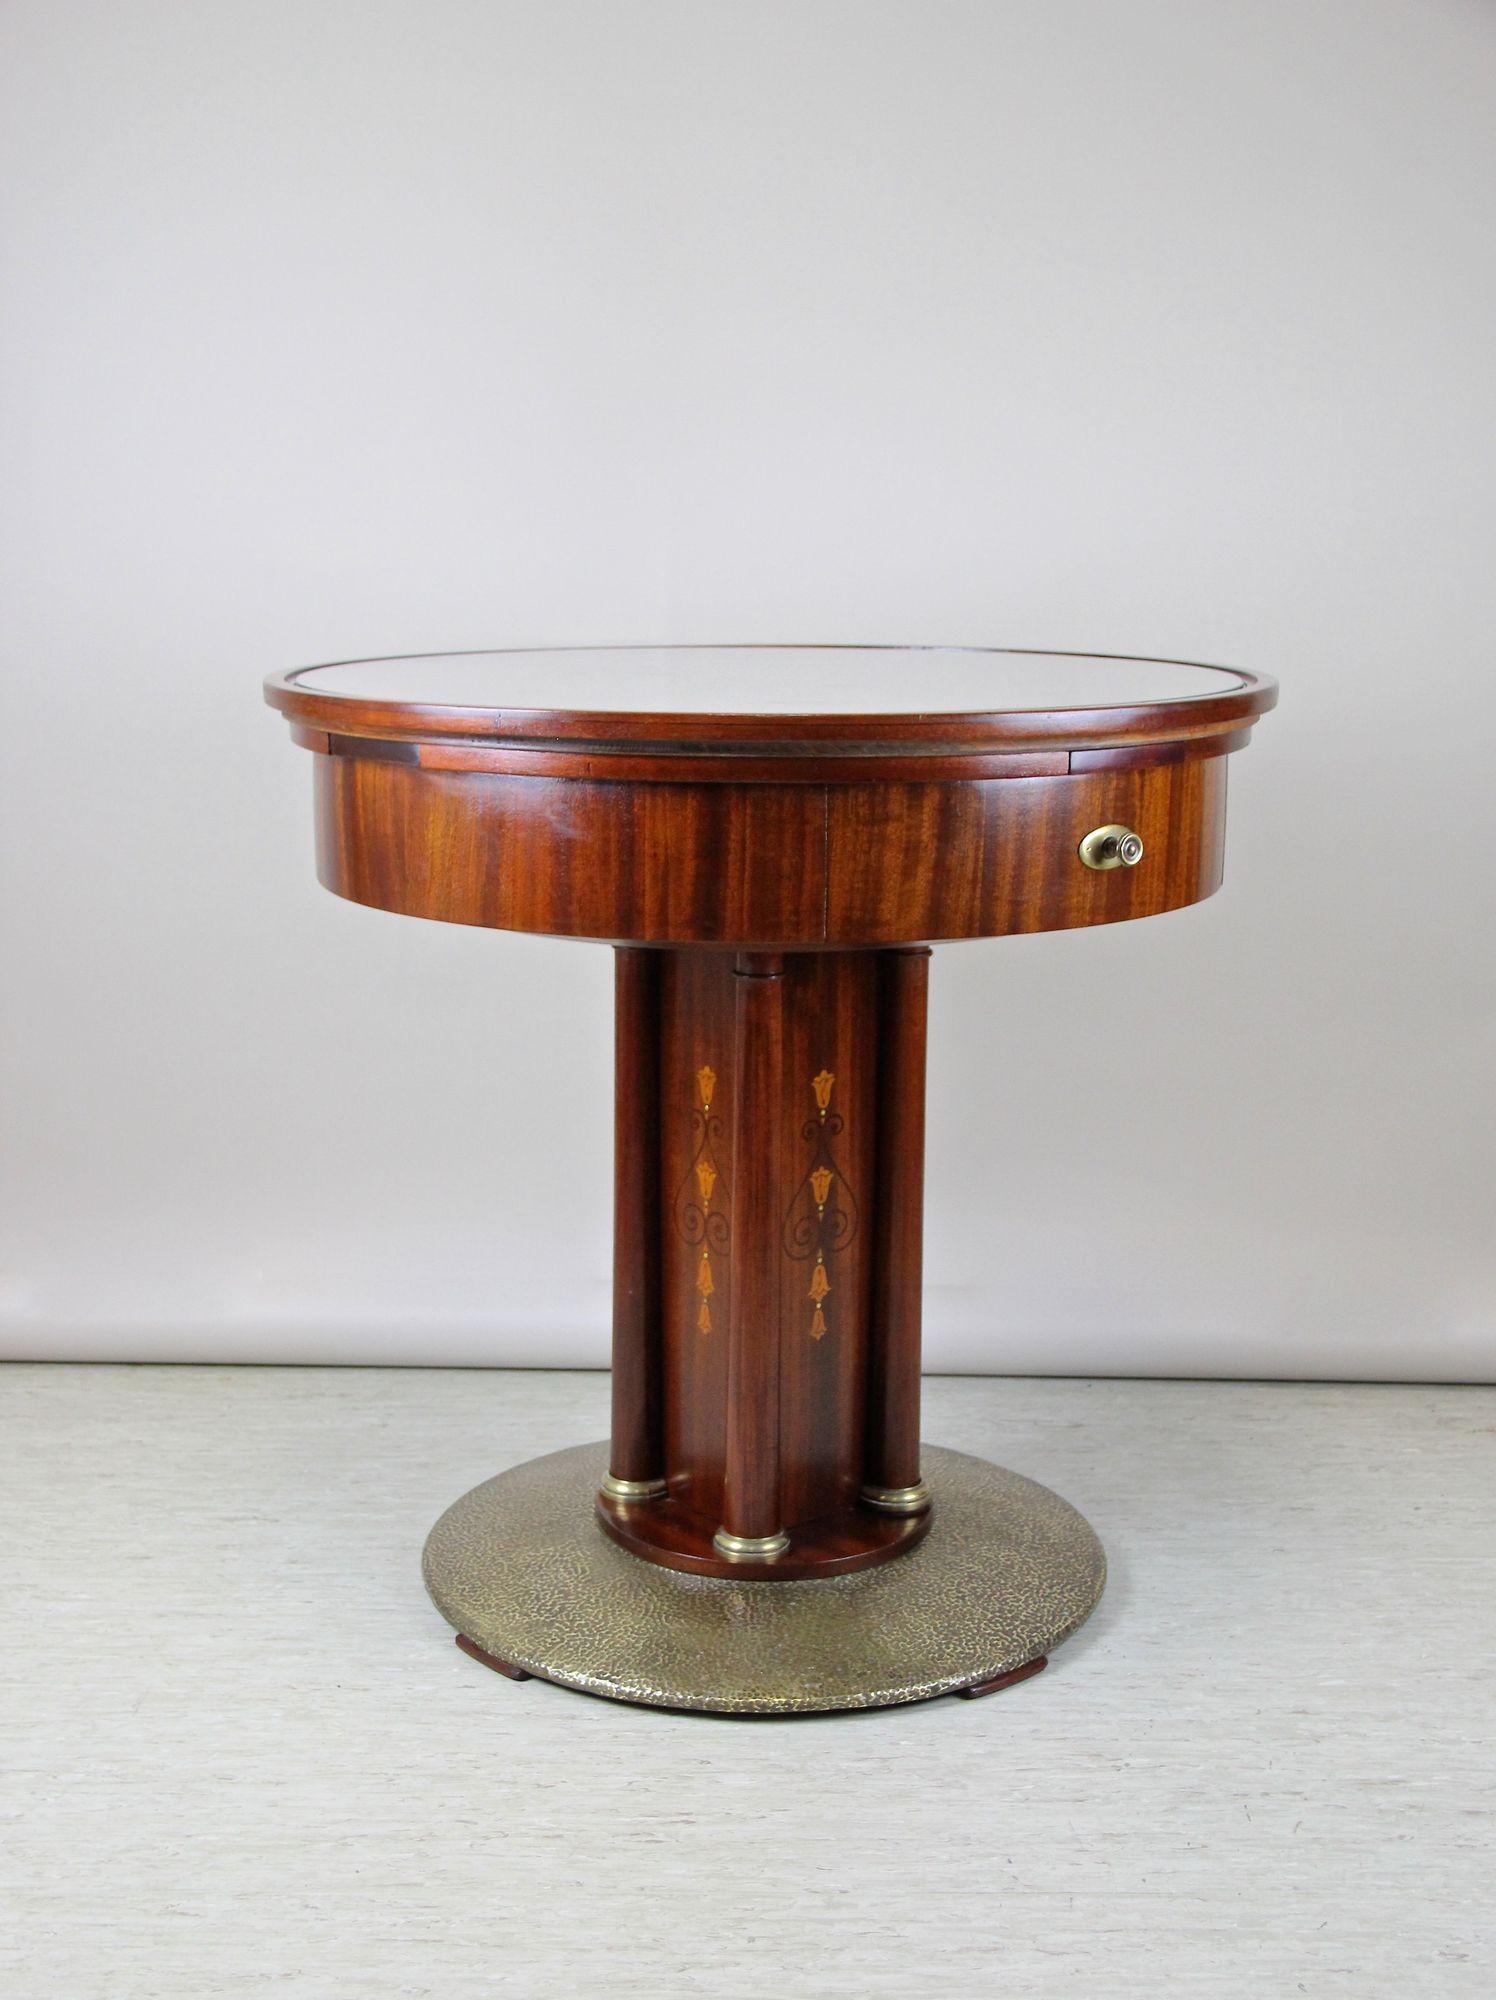 Appliqué Art Nouveau Mahogany Gaming Table with Hammered Brass Base, Austria, circa 1910 For Sale